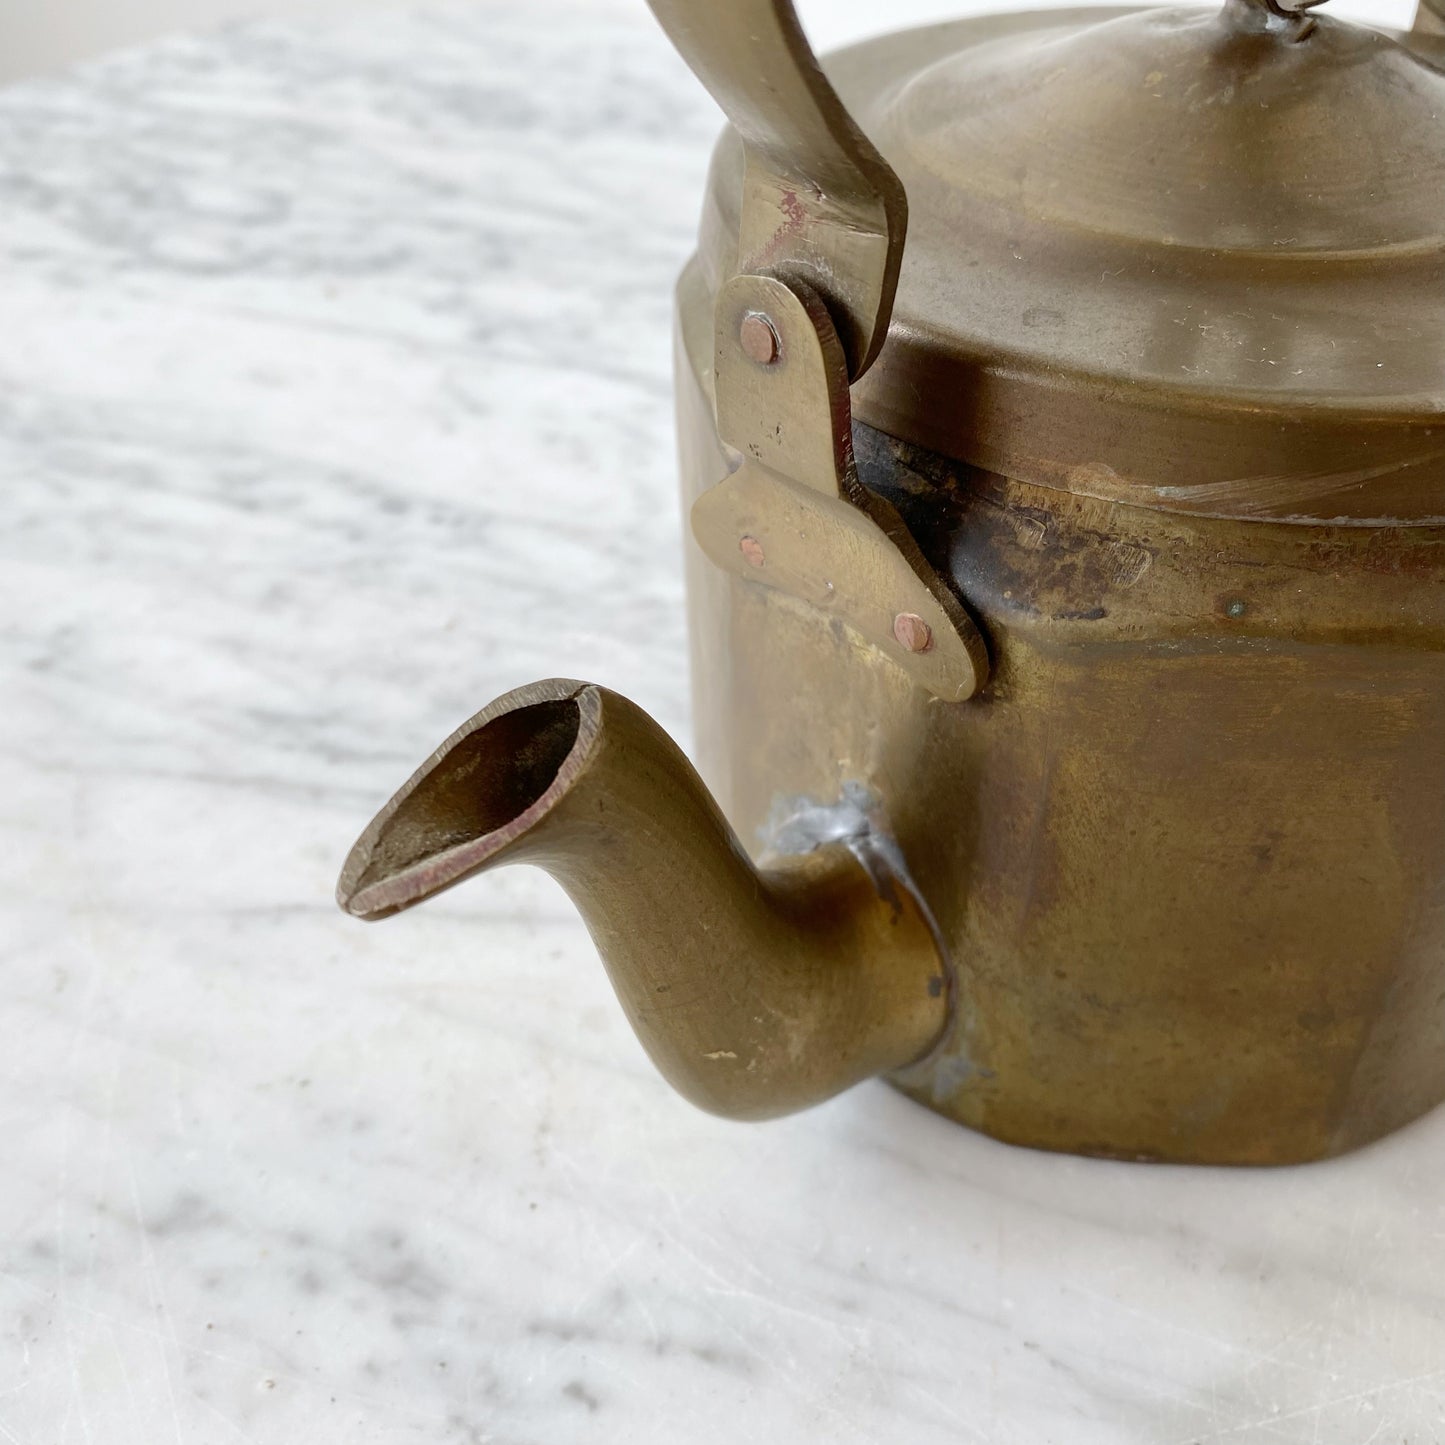 Vintage Brass Plated Teapot